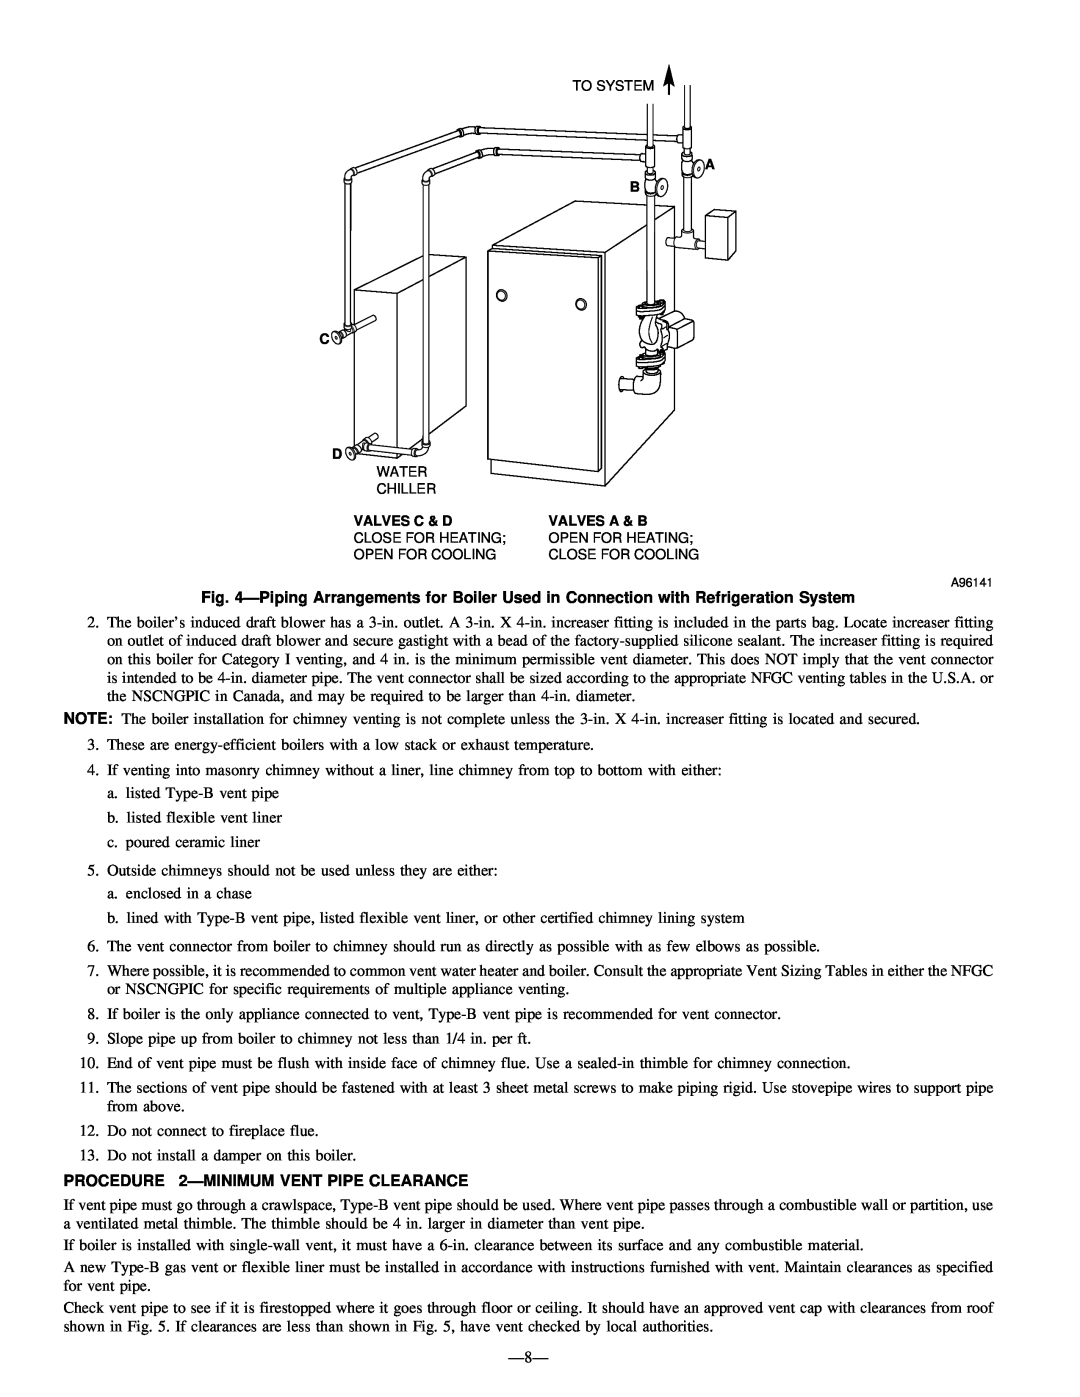 National Products Series B, BW3 instruction manual PROCEDURE 2ÐMINIMUM VENT PIPE CLEARANCE 